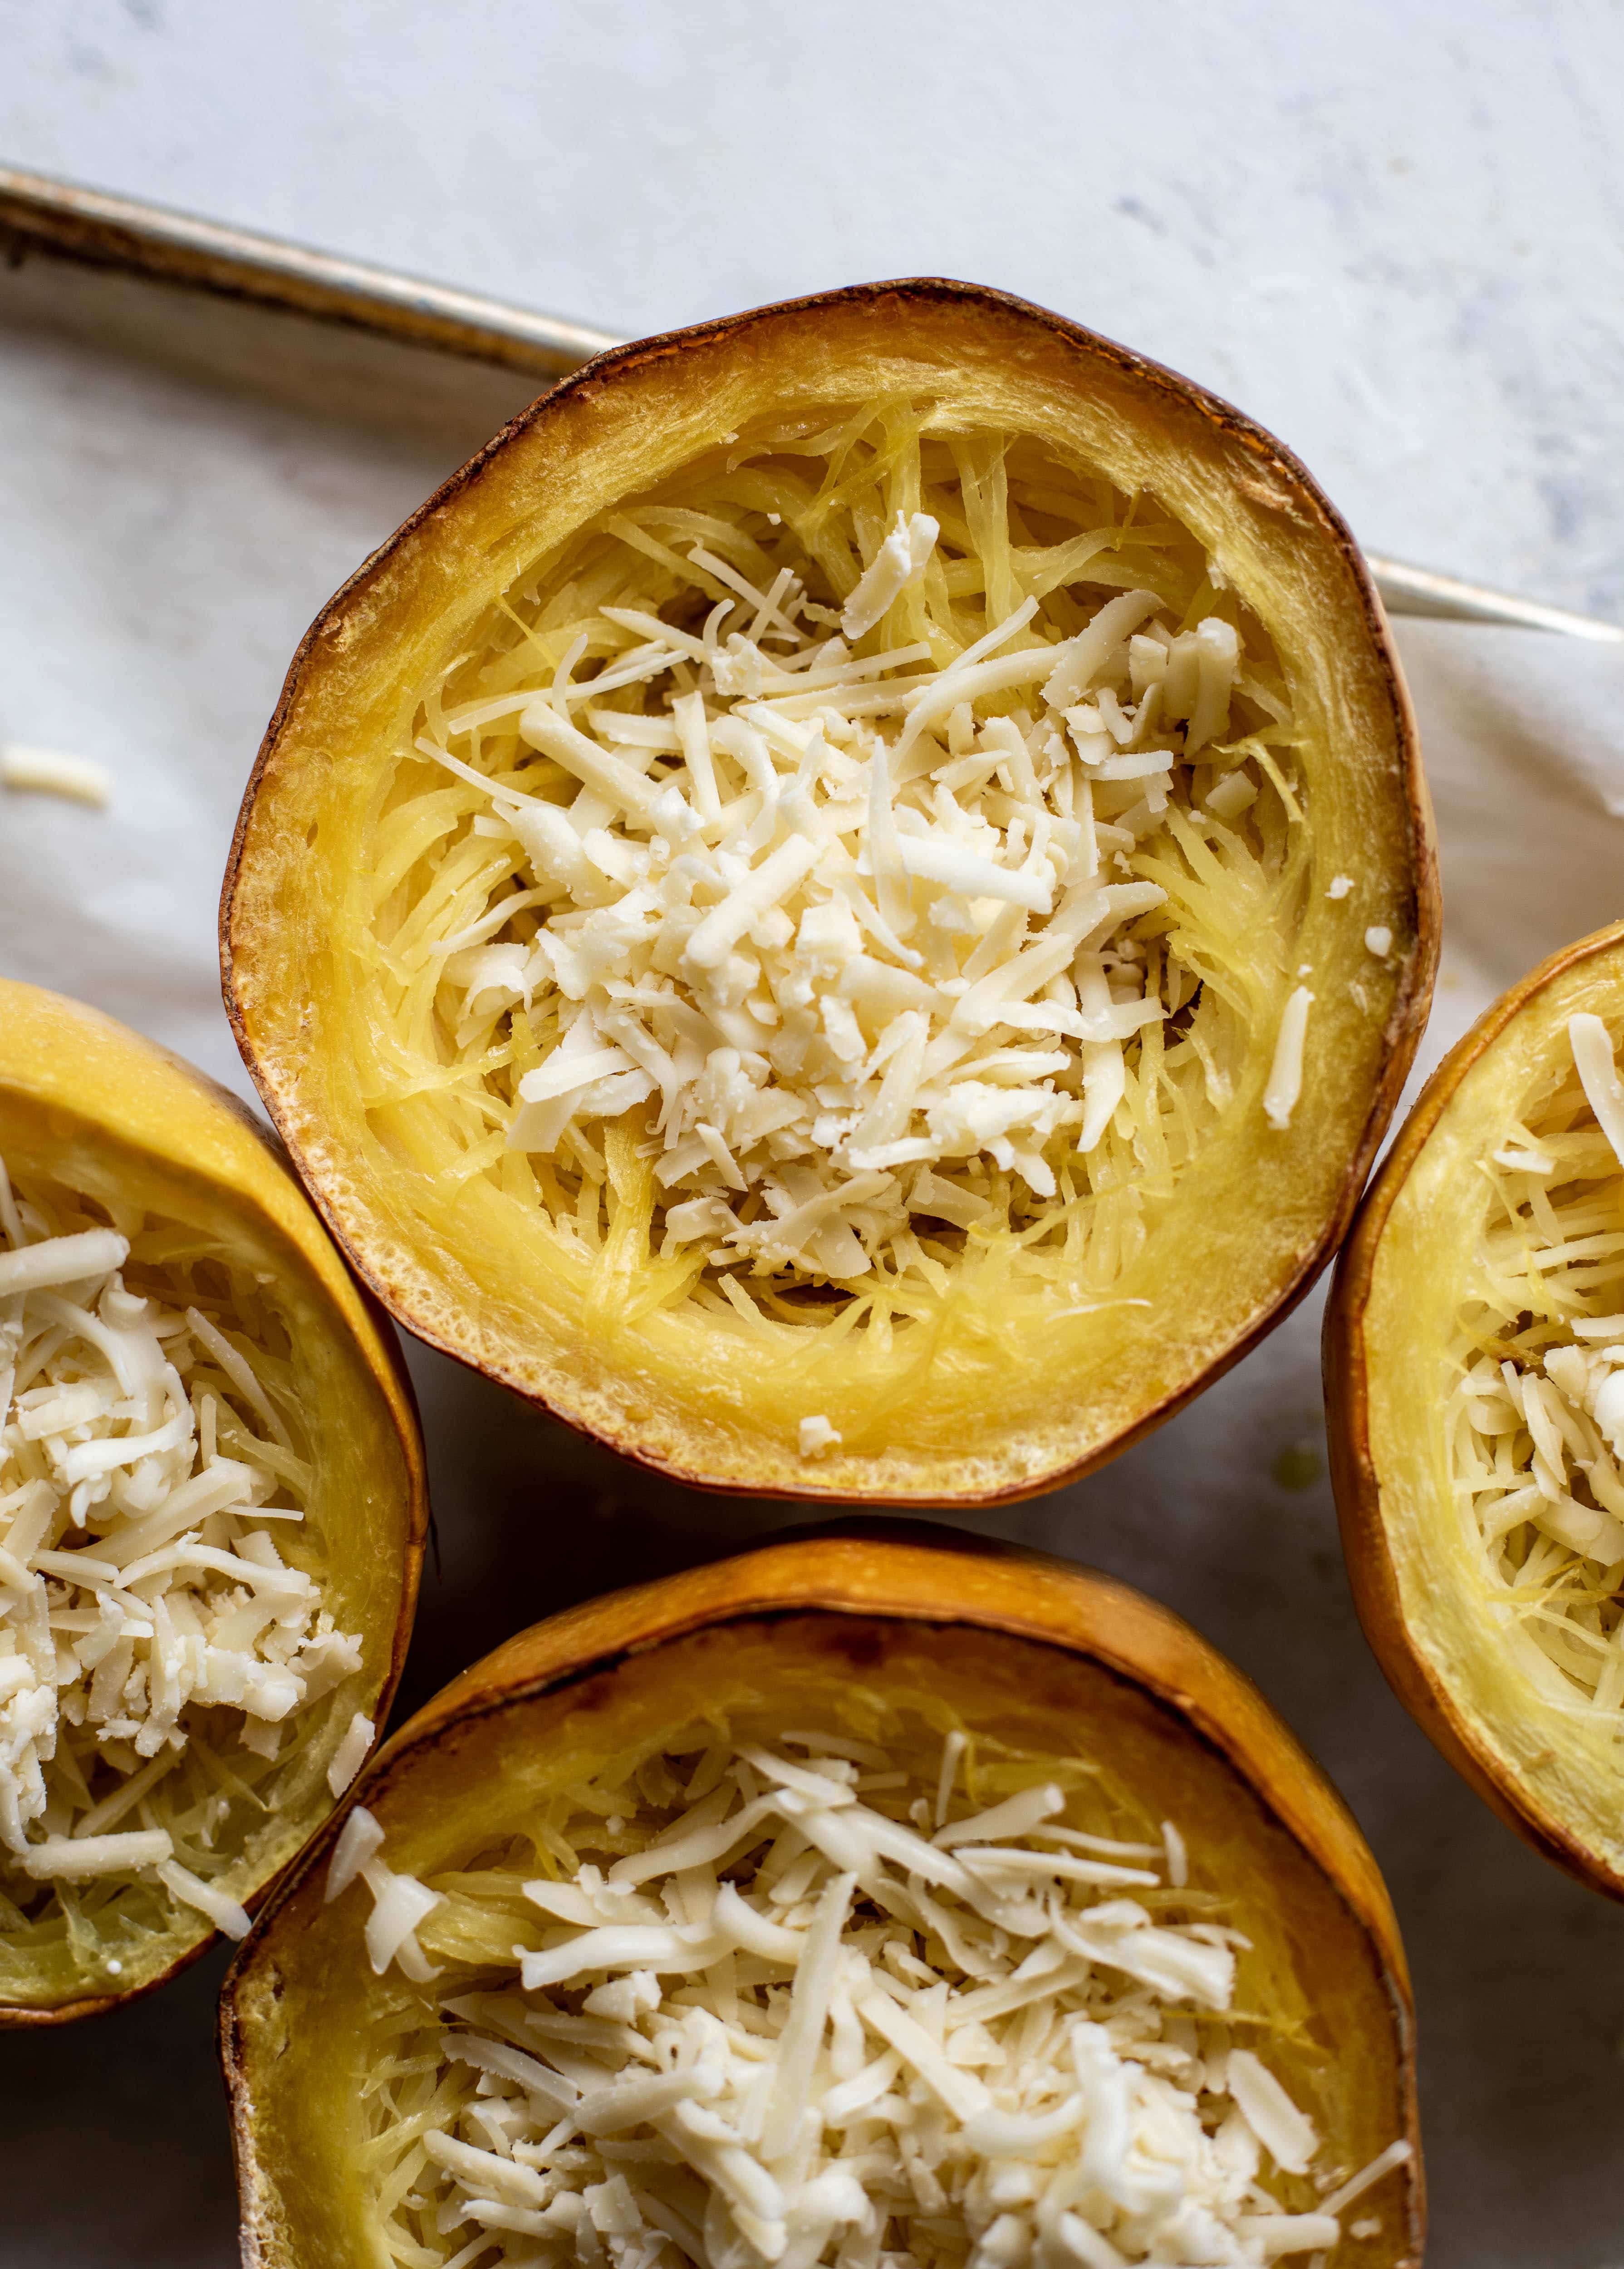 Three cheese spaghetti squash in a squash bowl! Squash tossed with fontina, gruyere and parmesan to make a creamy comforting meal.